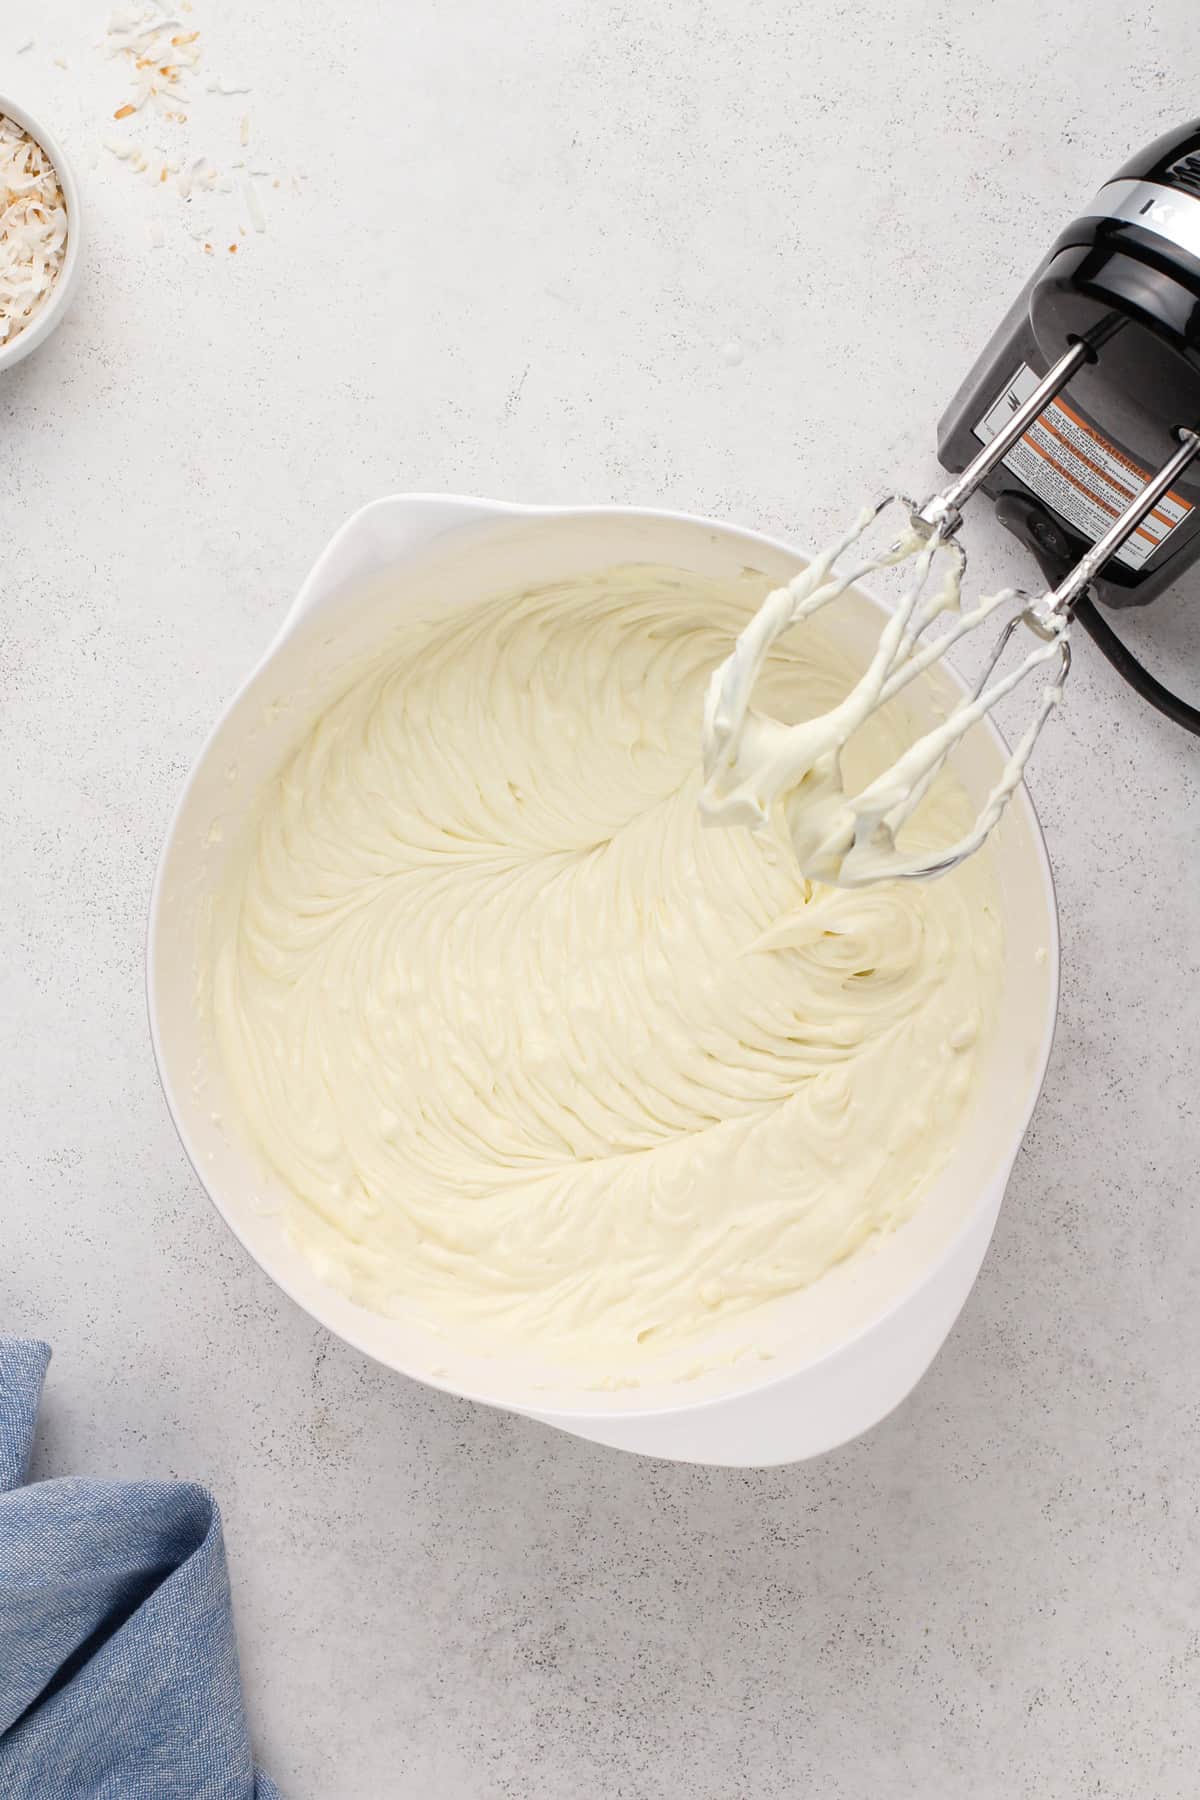 Coconut cheesecake filling in a white mixing bowl.